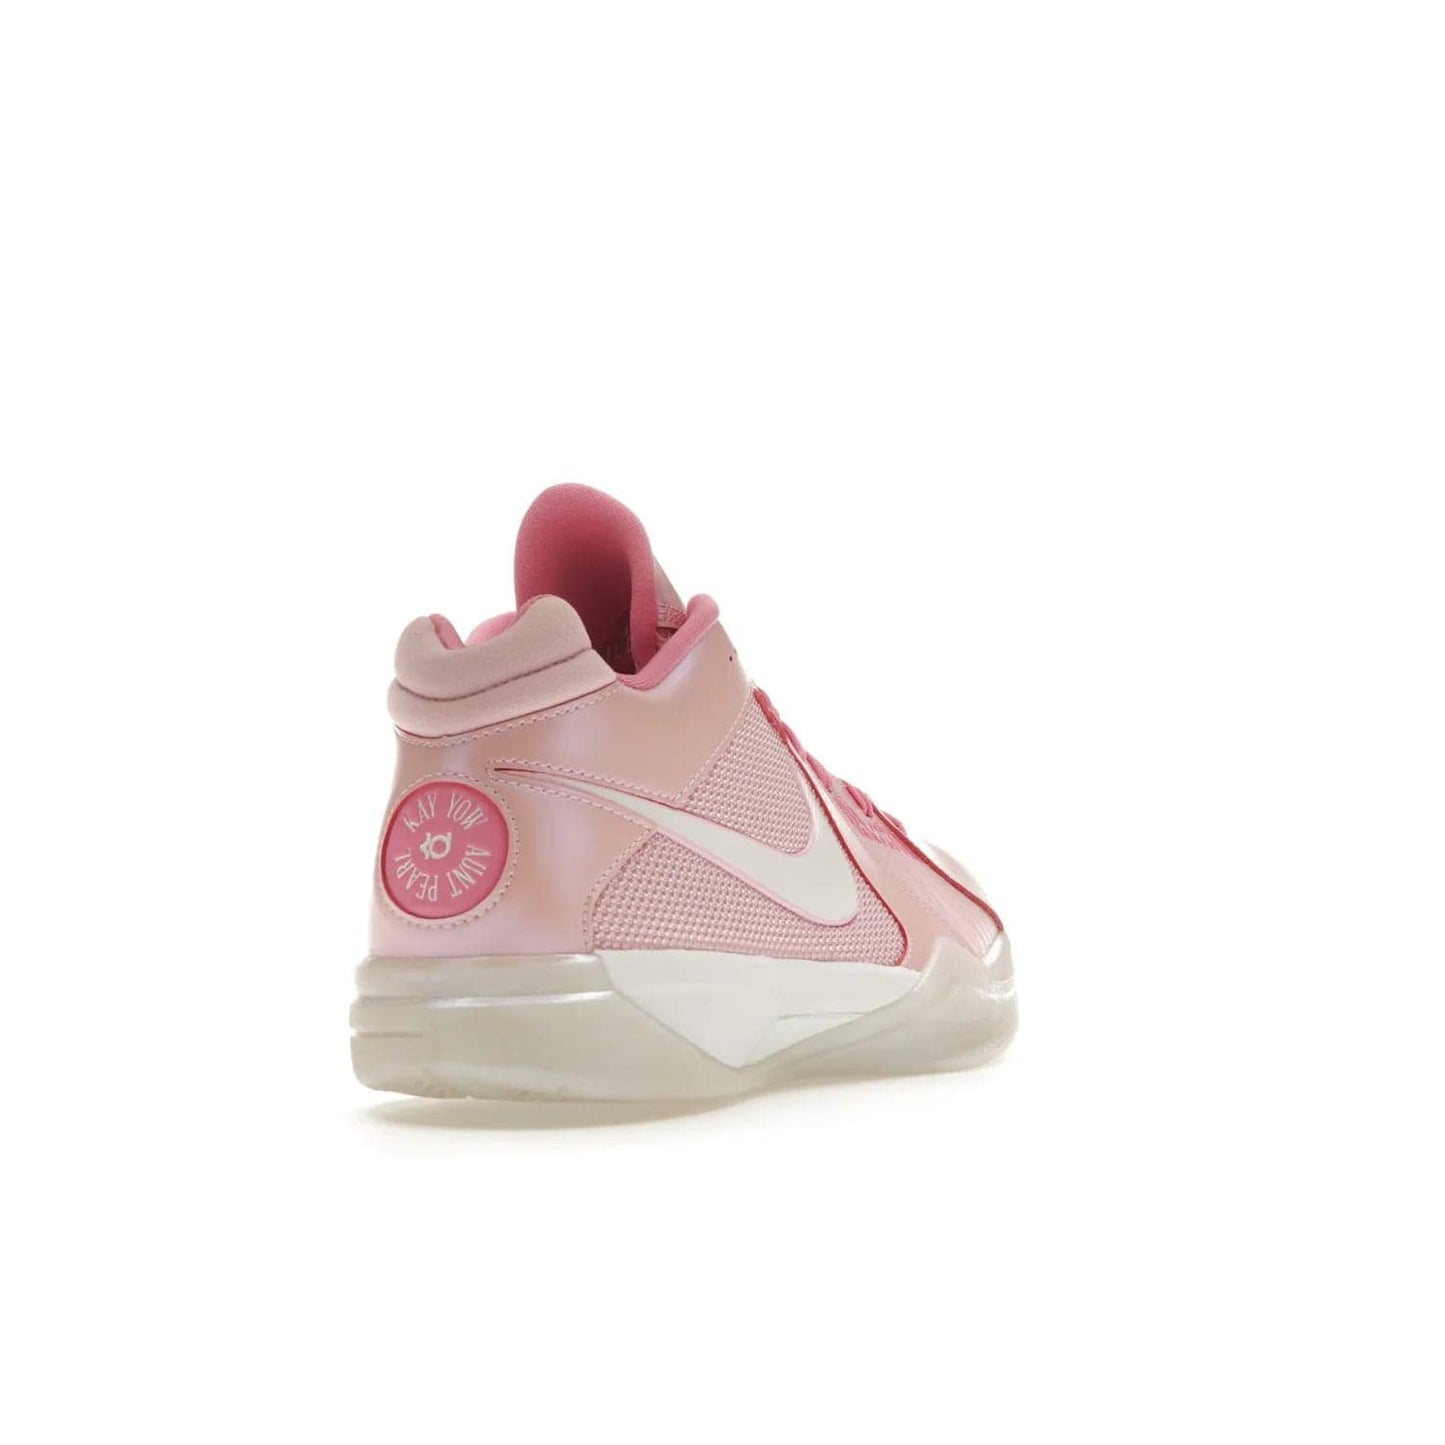 Nike KD 3 Aunt Pearl - Image 31 - Only at www.BallersClubKickz.com - Introducing the Nike KD 3 Aunt Pearl. Featuring a bold Medium Soft Pink, White, & Lotus Pink colorway. Get ready to stand out this October 15th.